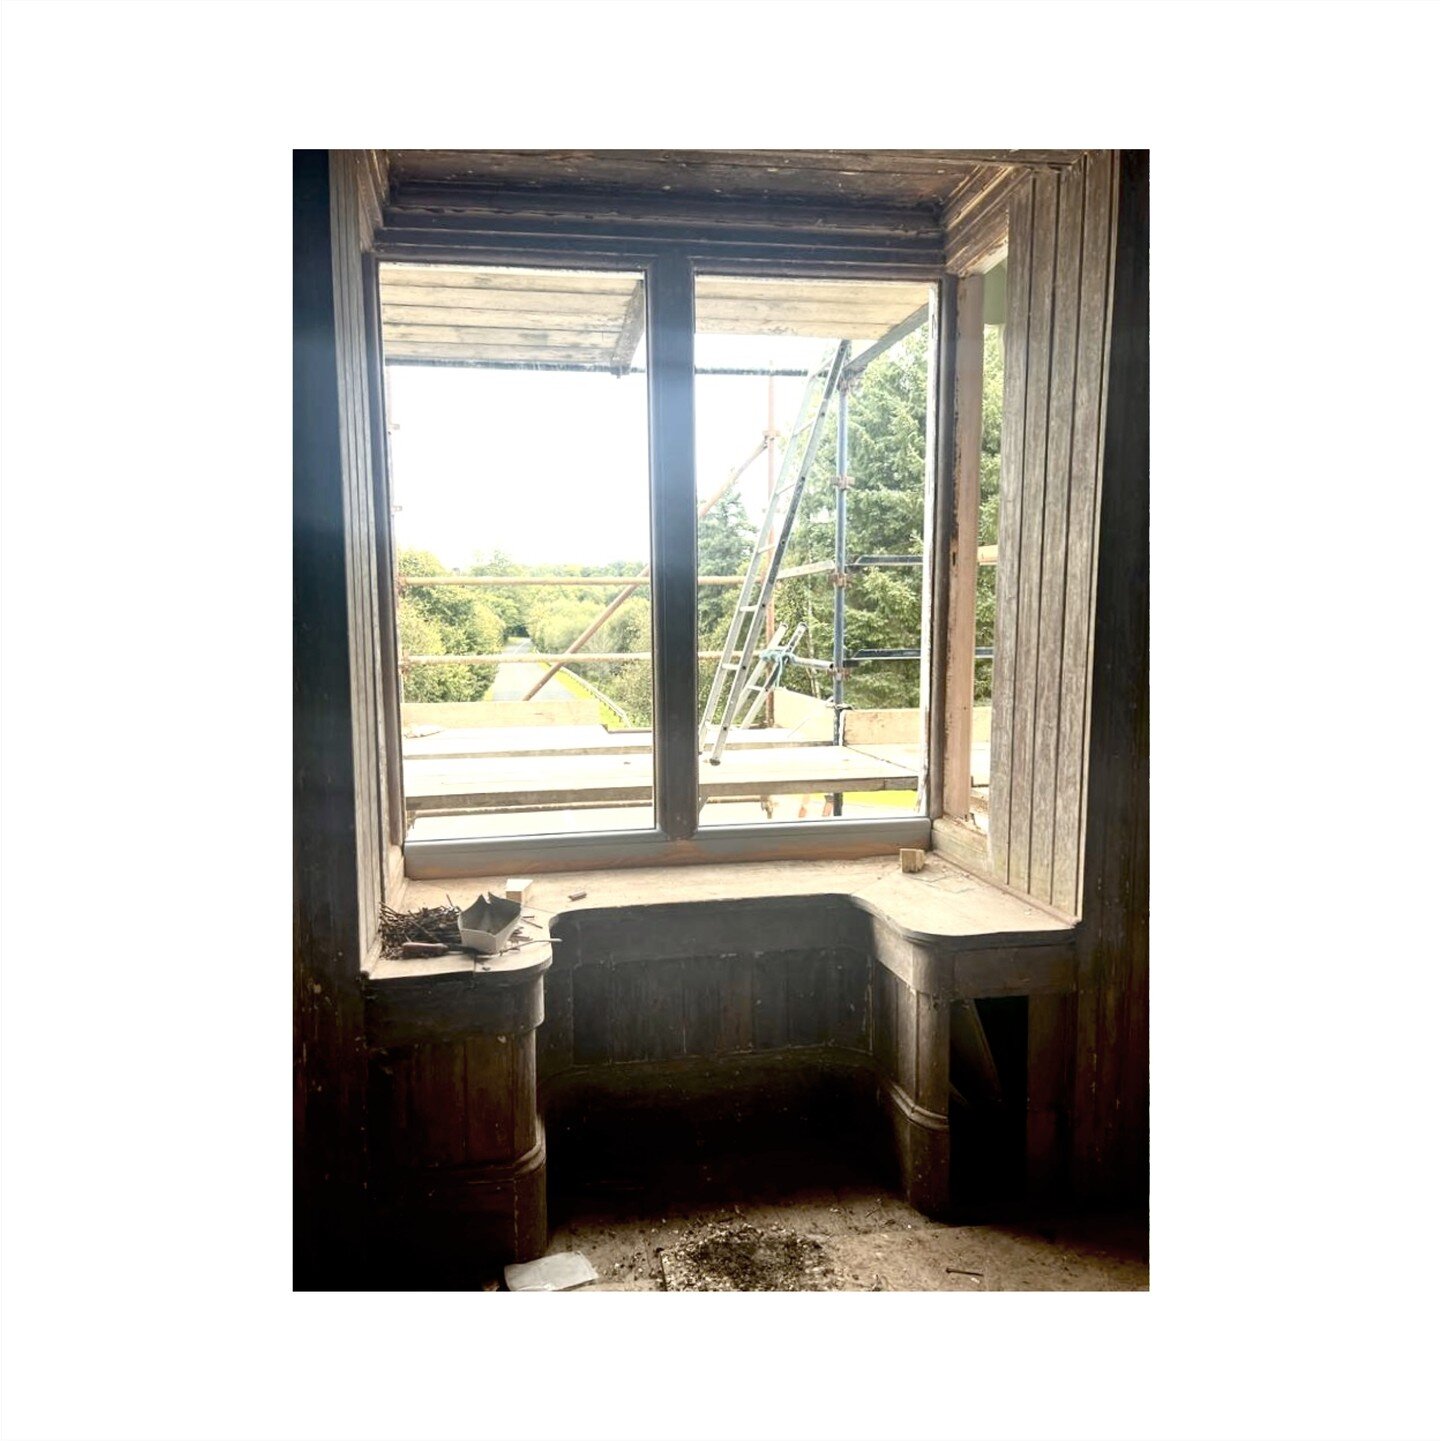 M O H I L L - L O D G E
P R O G R E S S
2 of 2

At Mohill Lodge we have a number of these beautiful seated bay windows which are being restored.

While we have the diamond leaded glass out of the window frames it is great to see the window seat in co